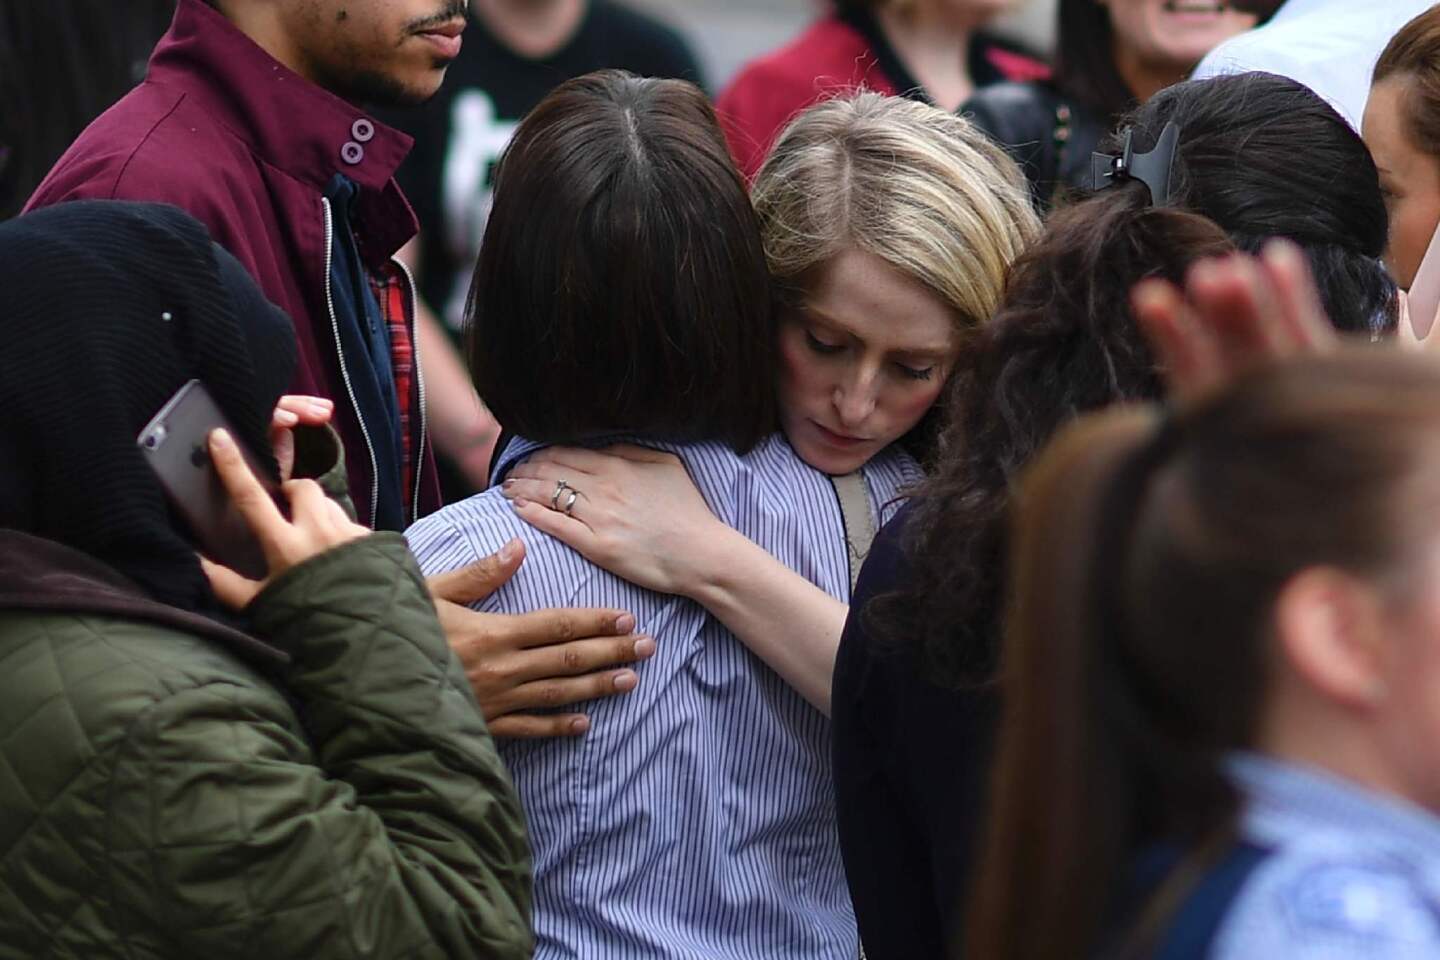 Workers hug each other after being evacuated from the Arndale Centre shopping mall in Manchester on Tuesday following a security alert.